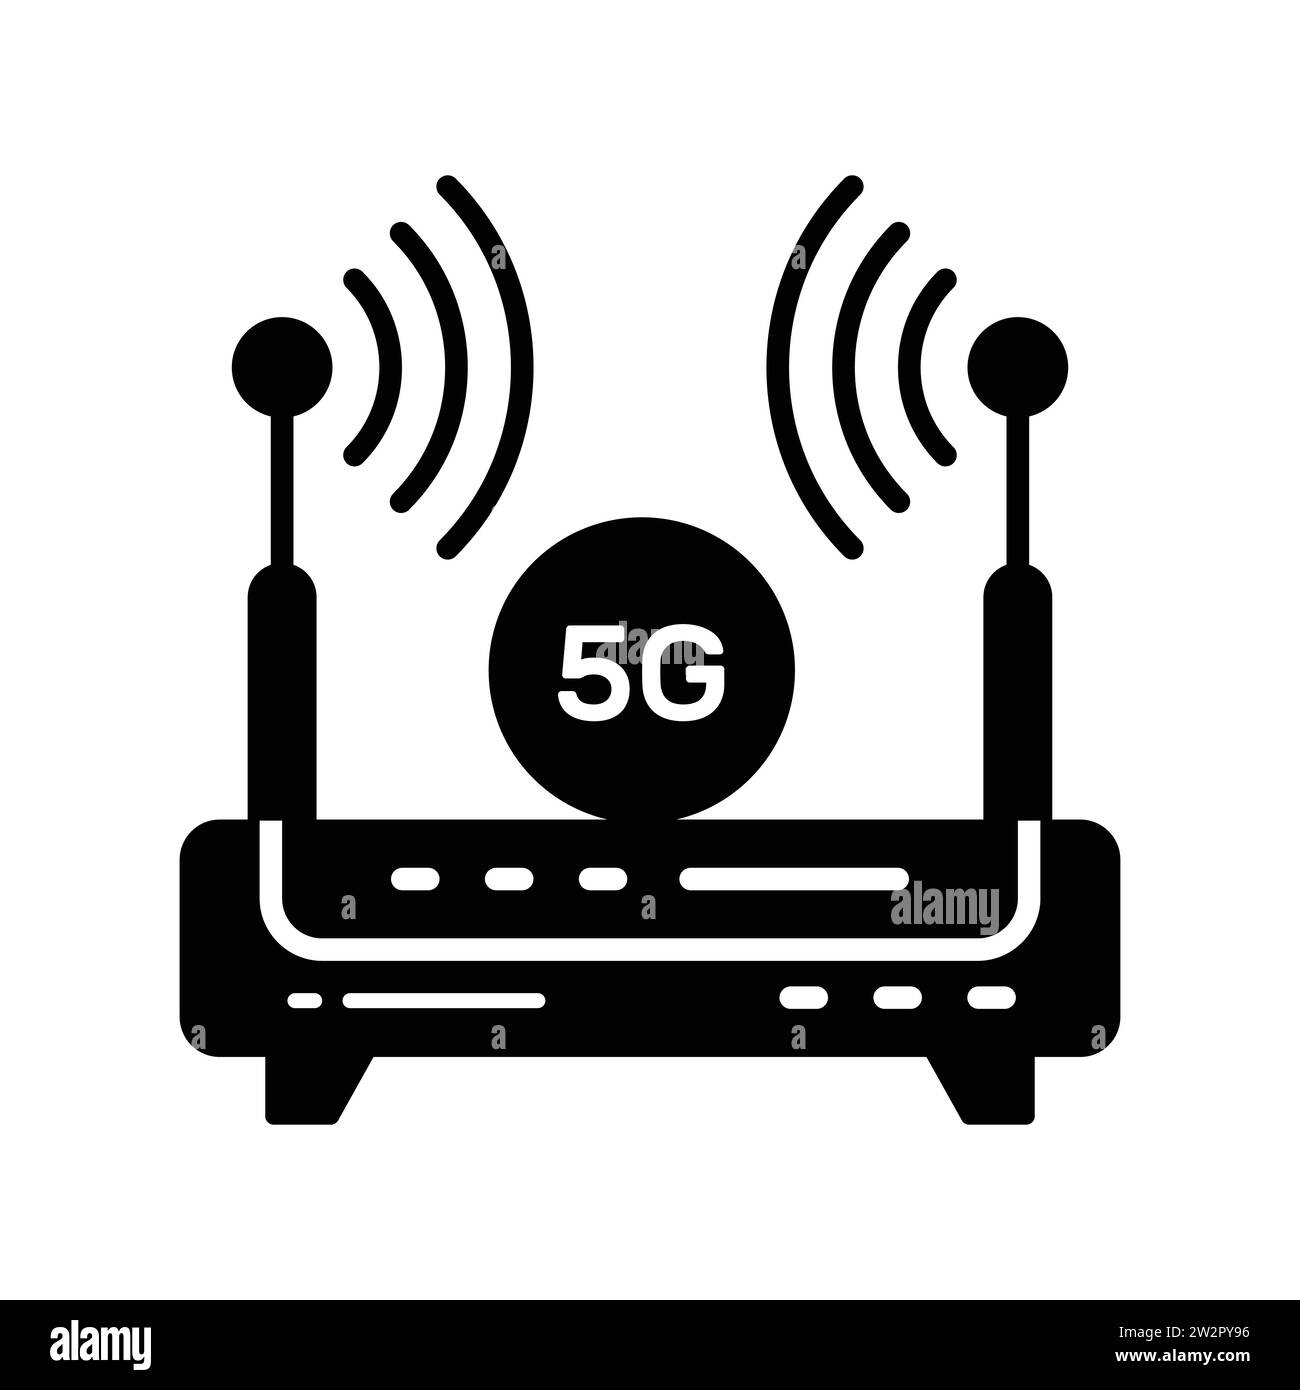 Wifi router with 5G internet signals denoting concept icon of 5G internet signals Stock Vector